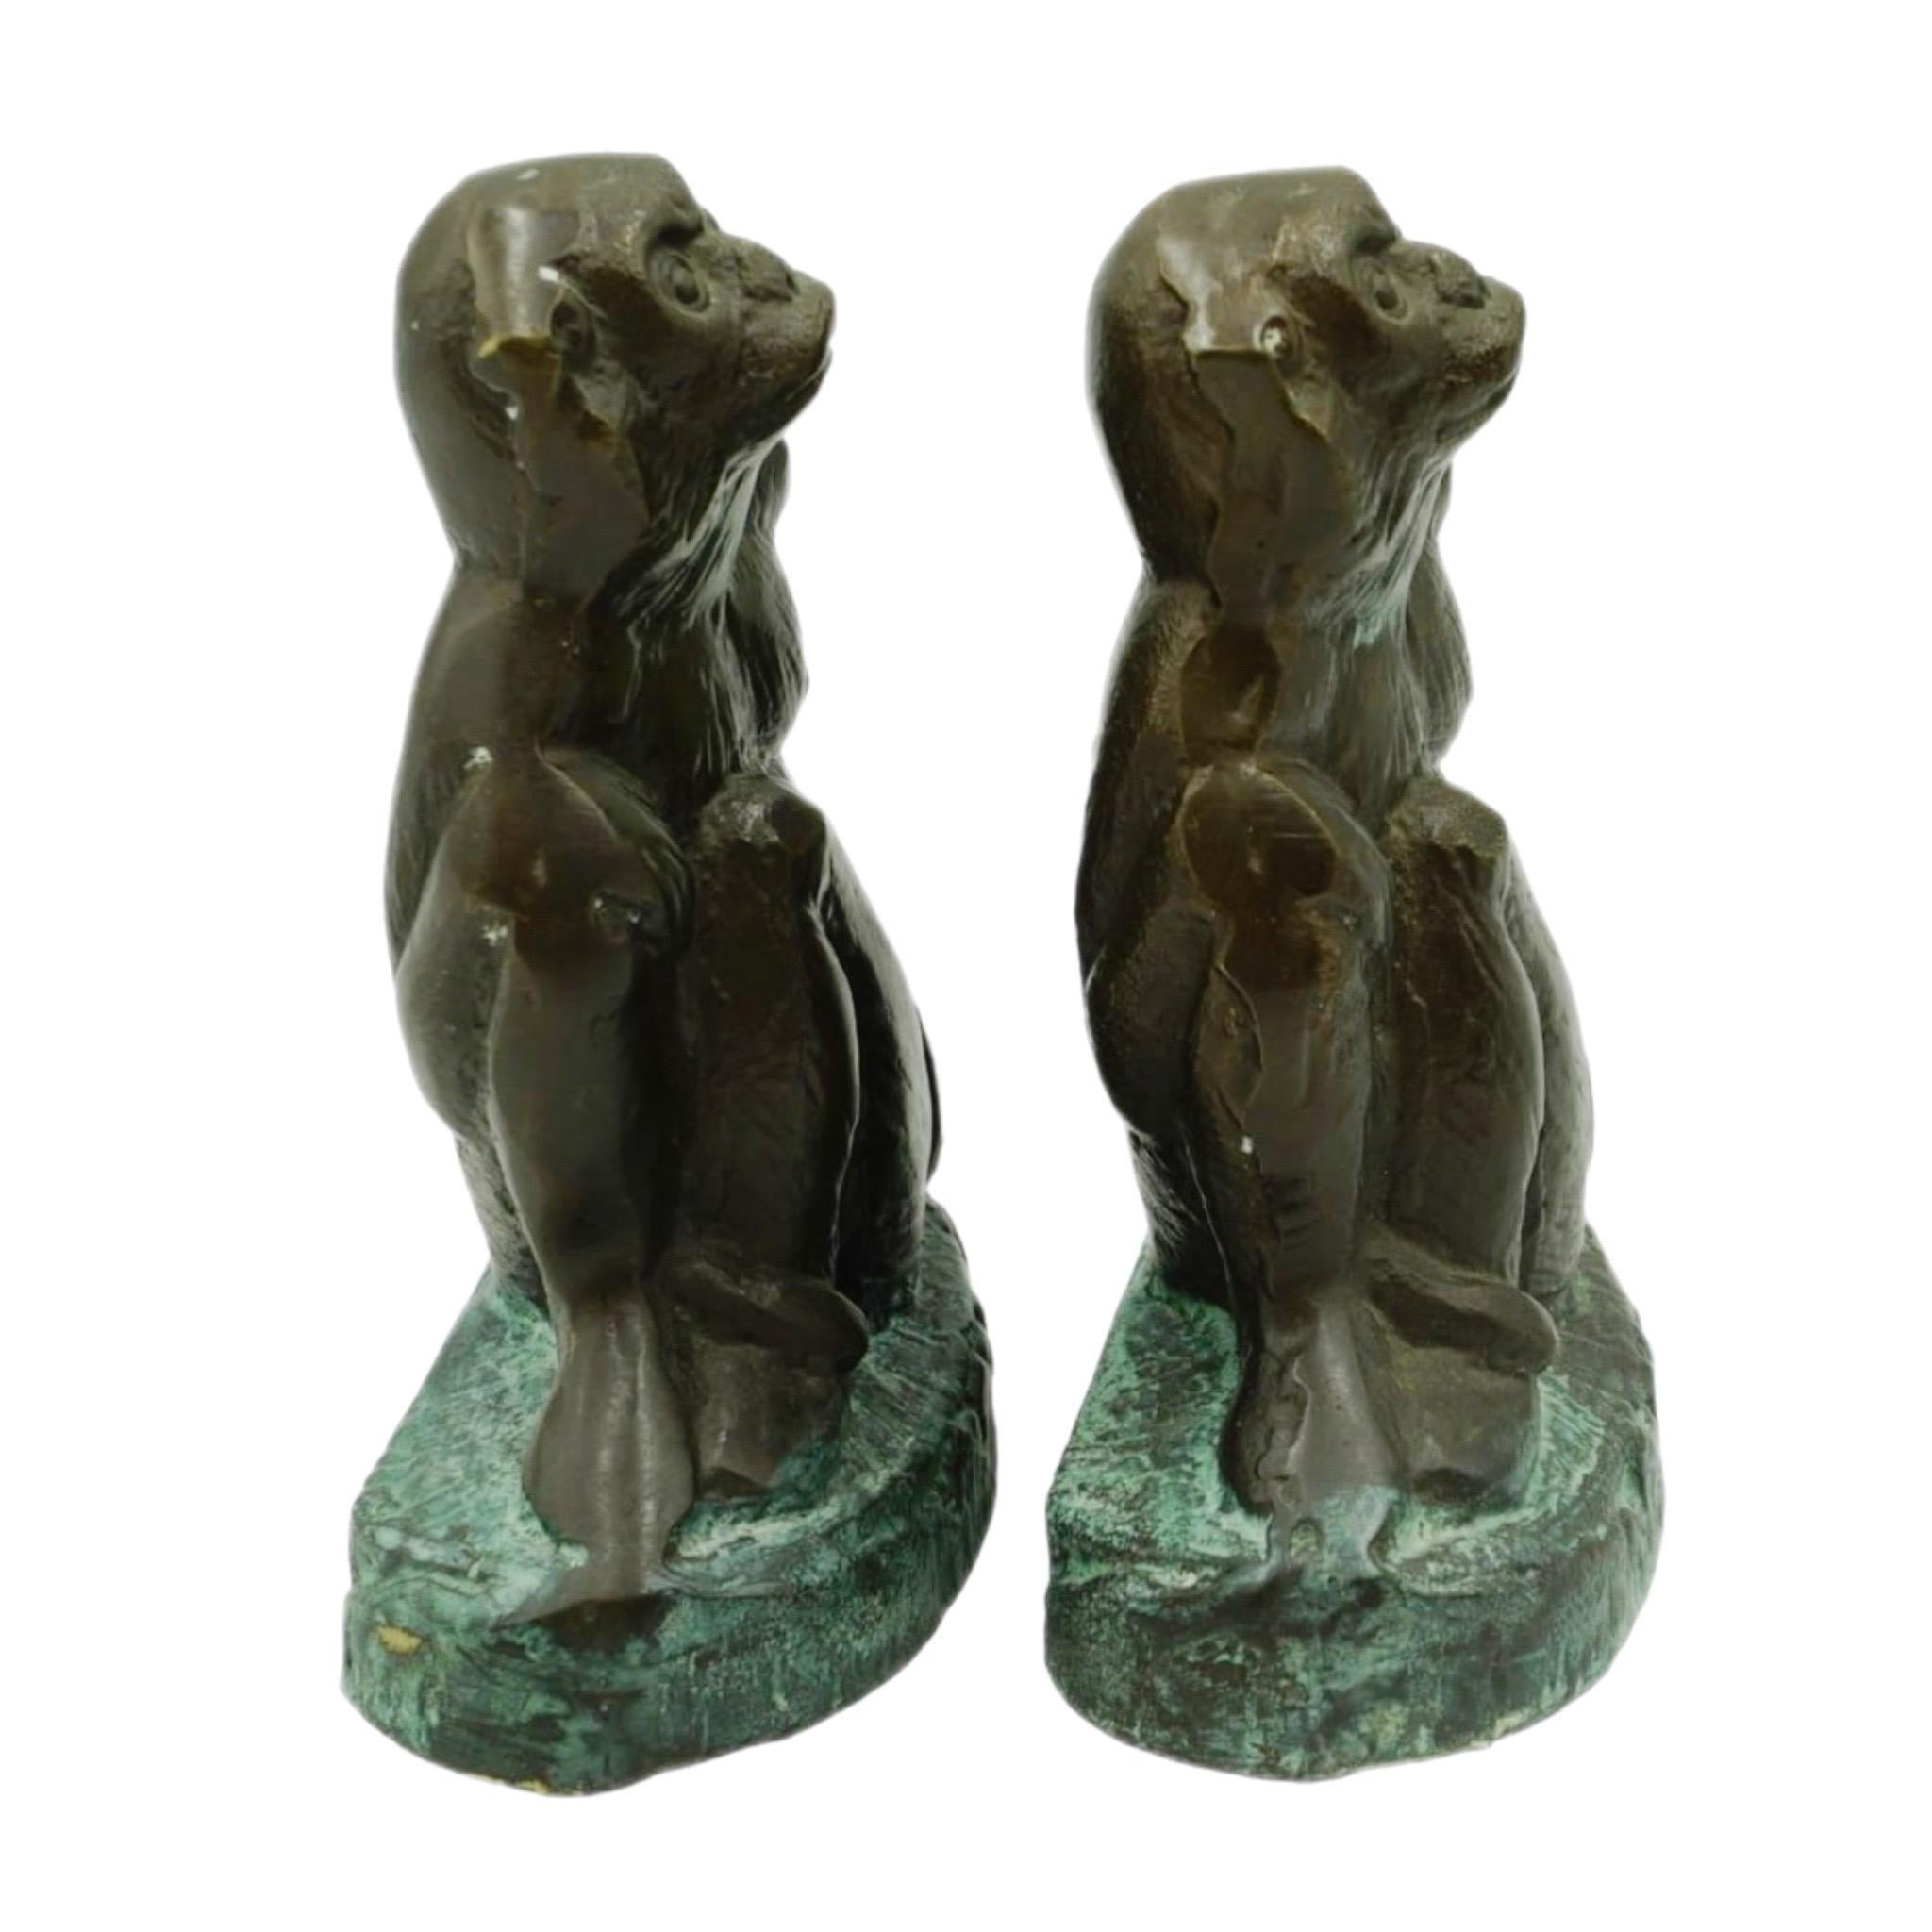 This is a pair of bronze brass heavy metal monkey bookends. The finish is an antiqued bronze patina with verdigris style accent. Each monkey measures 6 inches tall by 4.5 inches across and are 2.5 inches deep. The pair is in excellent shape and